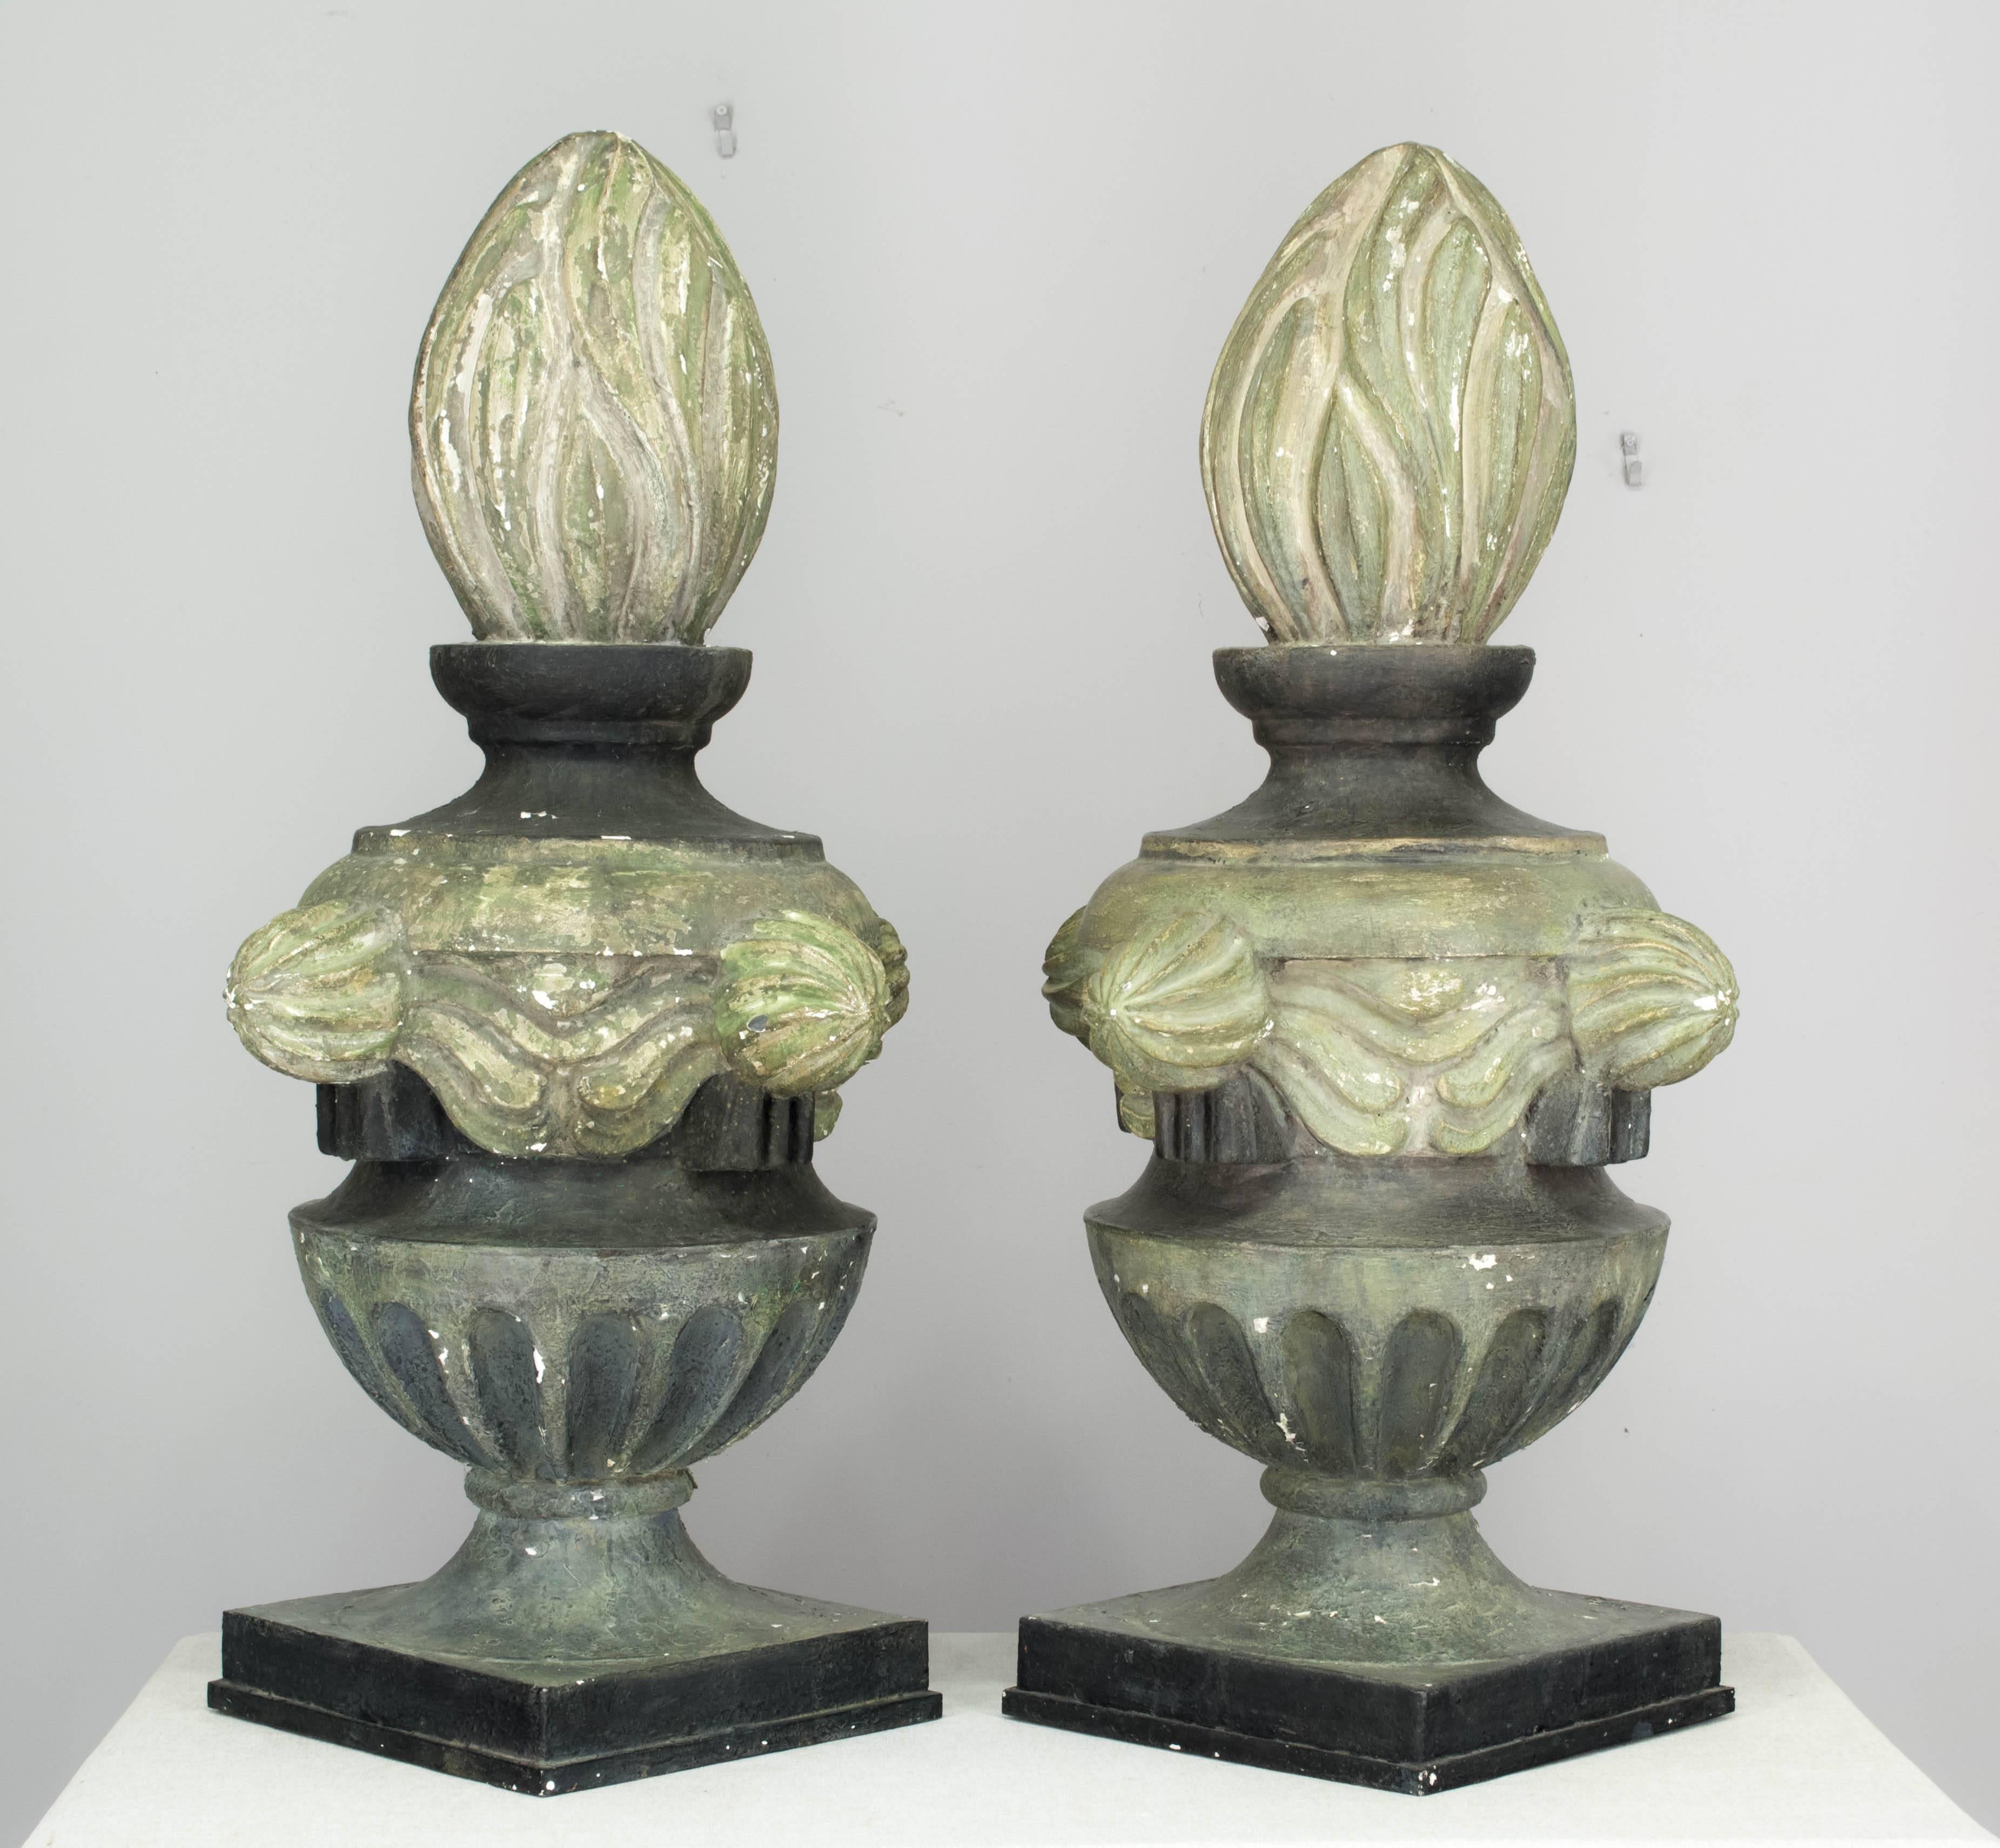 Pair of large French architectural  flame finials. Bases are gray painted metal and the flame details are verdigris painted zinc. Nice sculptural forms with beautiful grey green color. Original patina with paint flaking off in places. Overall: 41